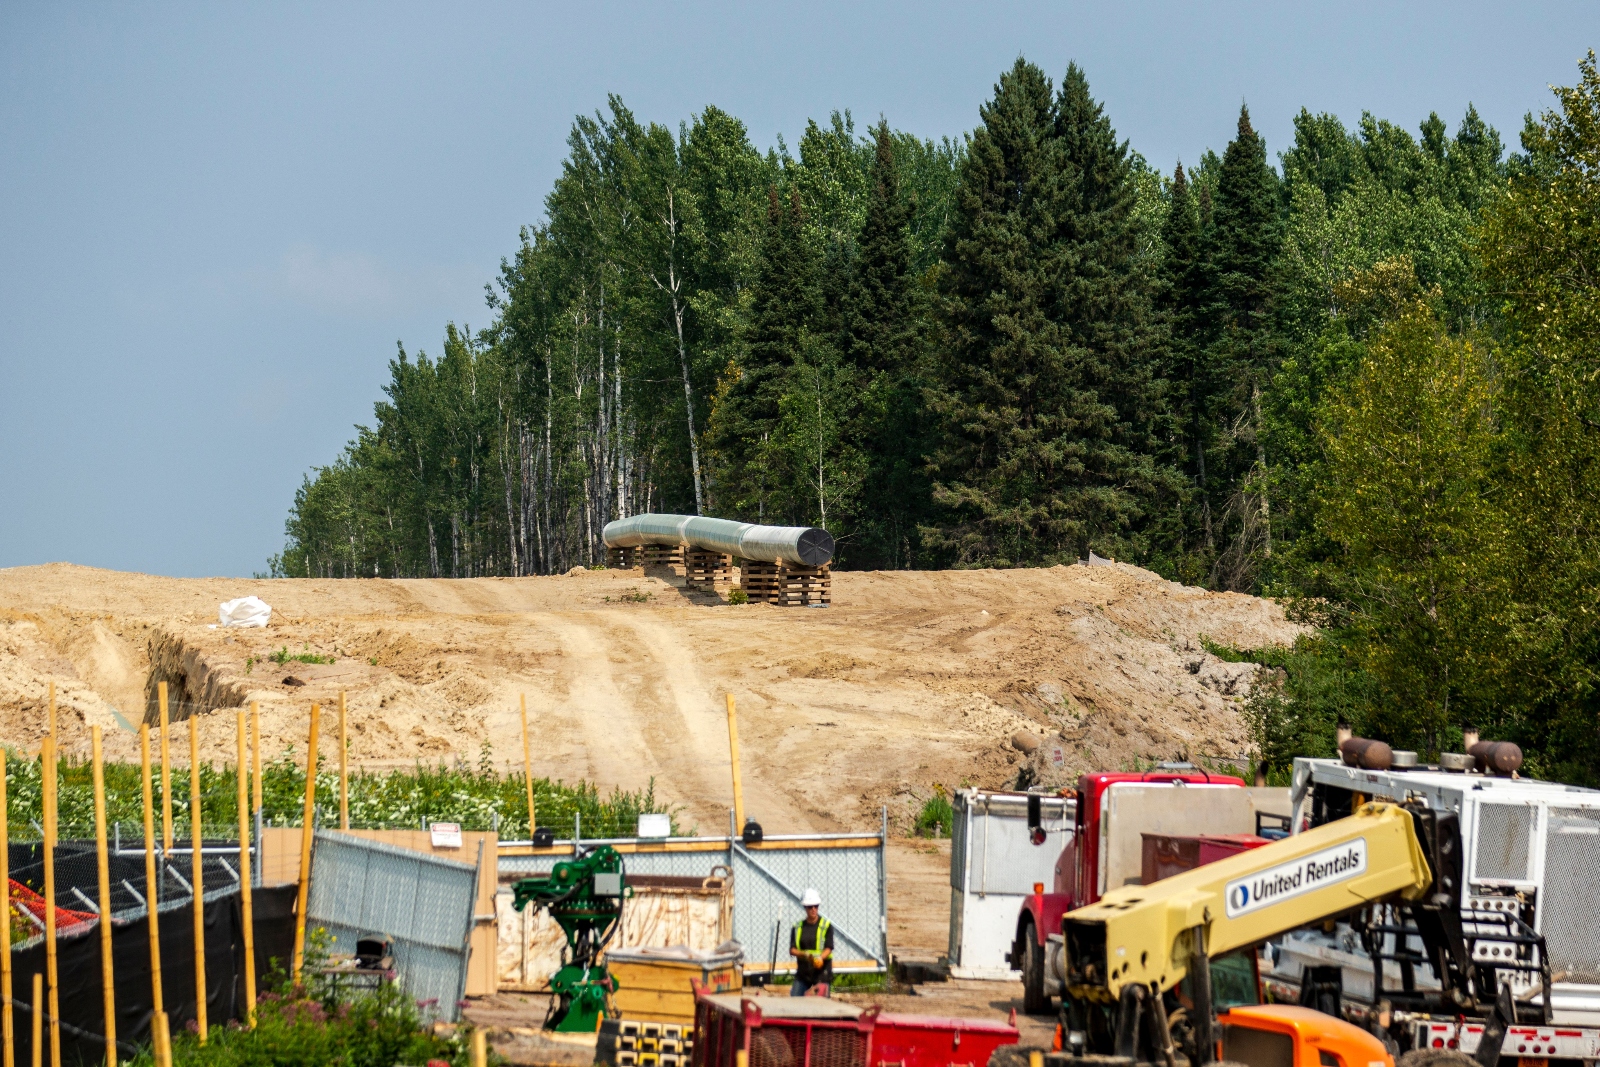 A stand of pine trees next to a bulldozed field where an unfinished pipe sits, next to construction equipment.